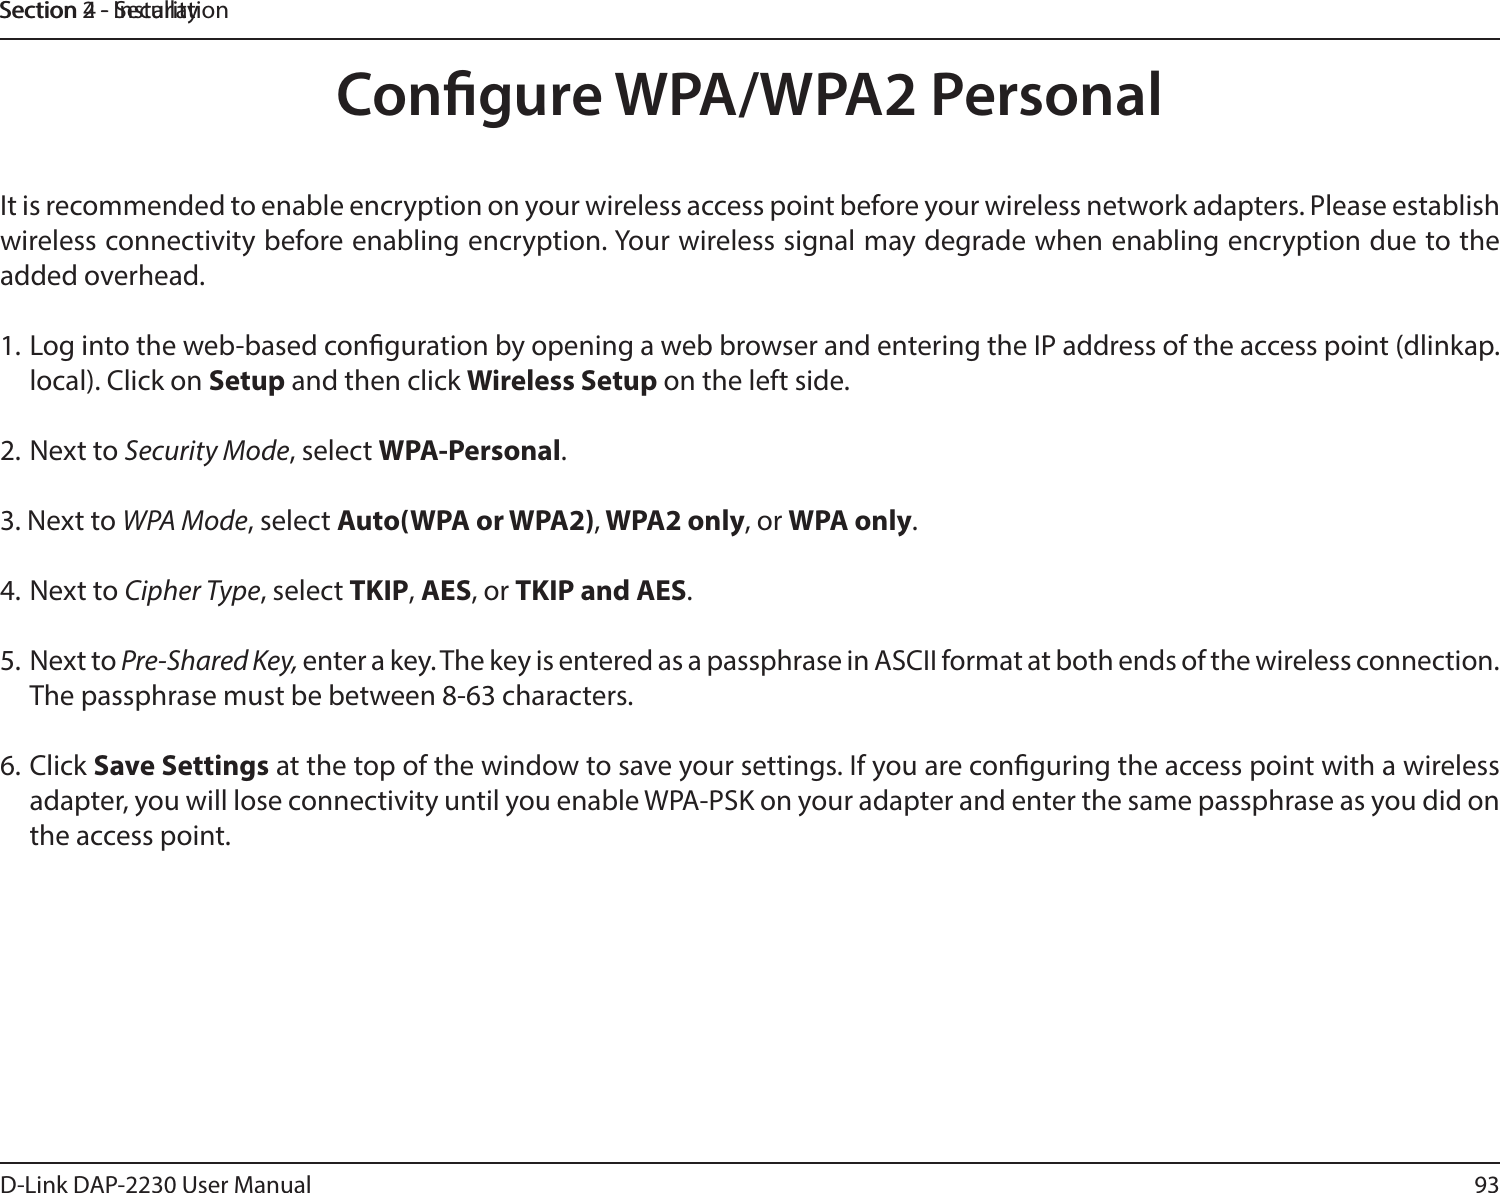 93D-Link DAP-2230 User ManualSection 2 - InstallationSection 4 - SecurityCongure WPA/WPA2 PersonalIt is recommended to enable encryption on your wireless access point before your wireless network adapters. Please establish wireless connectivity before enabling encryption. Your wireless signal may degrade when enabling encryption due to the added overhead.1. Log into the web-based conguration by opening a web browser and entering the IP address of the access point (dlinkap.local). Click on Setup and then click Wireless Setup on the left side.2. Next to Security Mode, select WPA-Personal.3. Next to WPA Mode, select Auto(WPA or WPA2), WPA2 only, or WPA only.4. Next to Cipher Type, select TKIP, AES, or TKIP and AES.5.  Next to Pre-Shared Key, enter a key. The key is entered as a passphrase in ASCII format at both ends of the wireless connection. The passphrase must be between 8-63 characters. 6. Click Save Settings at the top of the window to save your settings. If you are conguring the access point with a wireless adapter, you will lose connectivity until you enable WPA-PSK on your adapter and enter the same passphrase as you did on the access point.